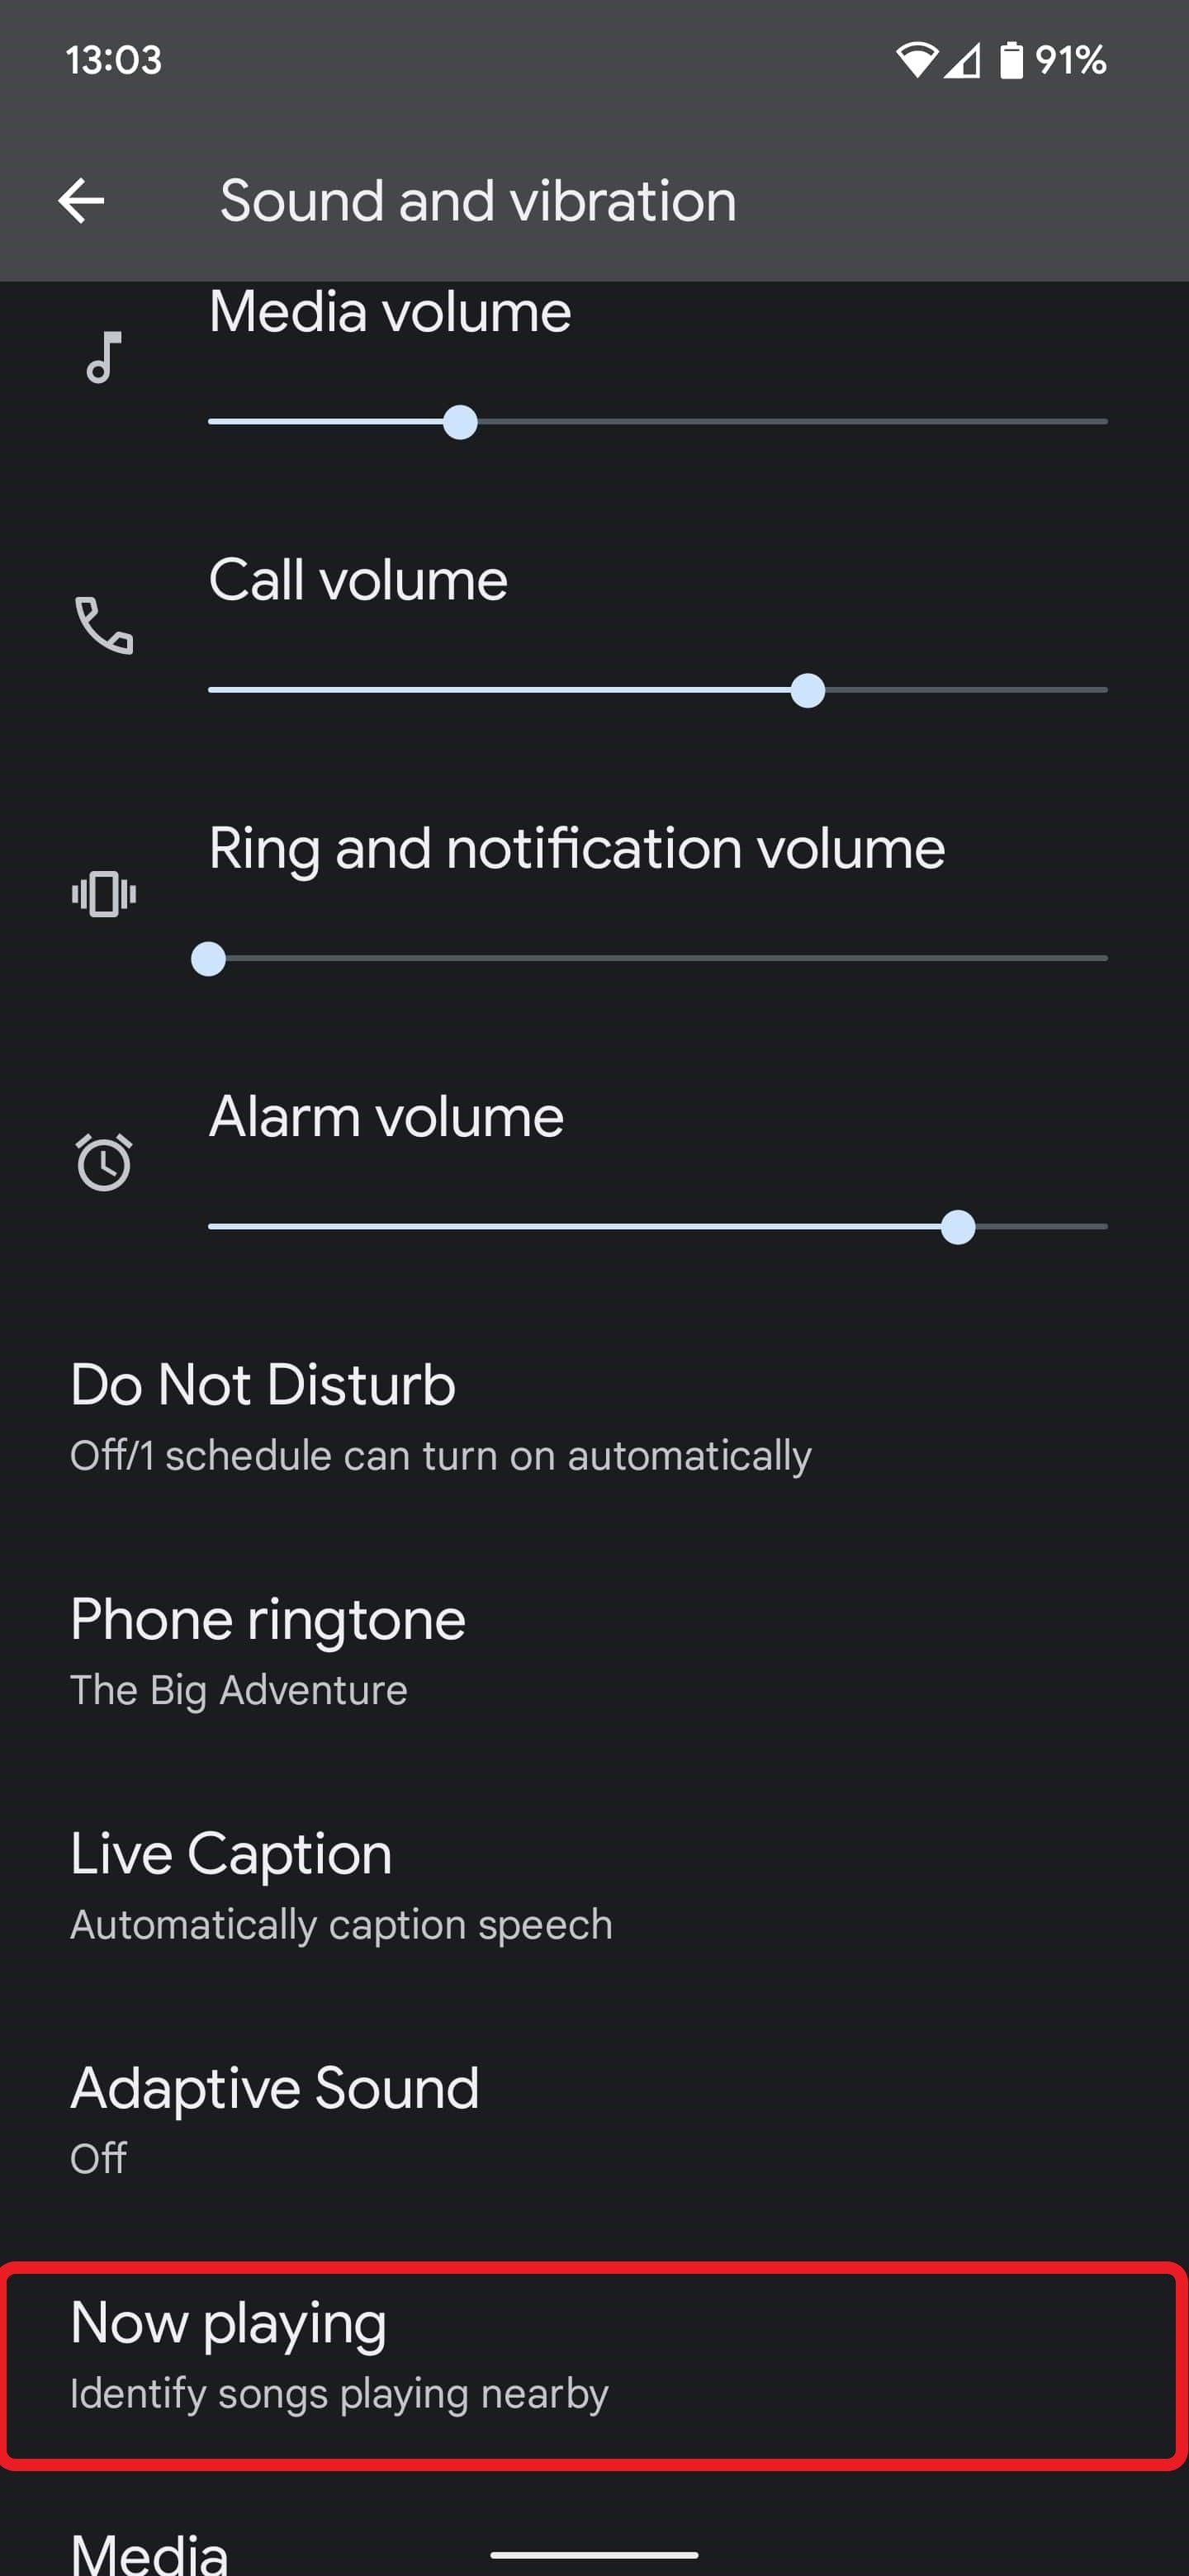 The Sound and vibration settings with a red box around the Now playing option